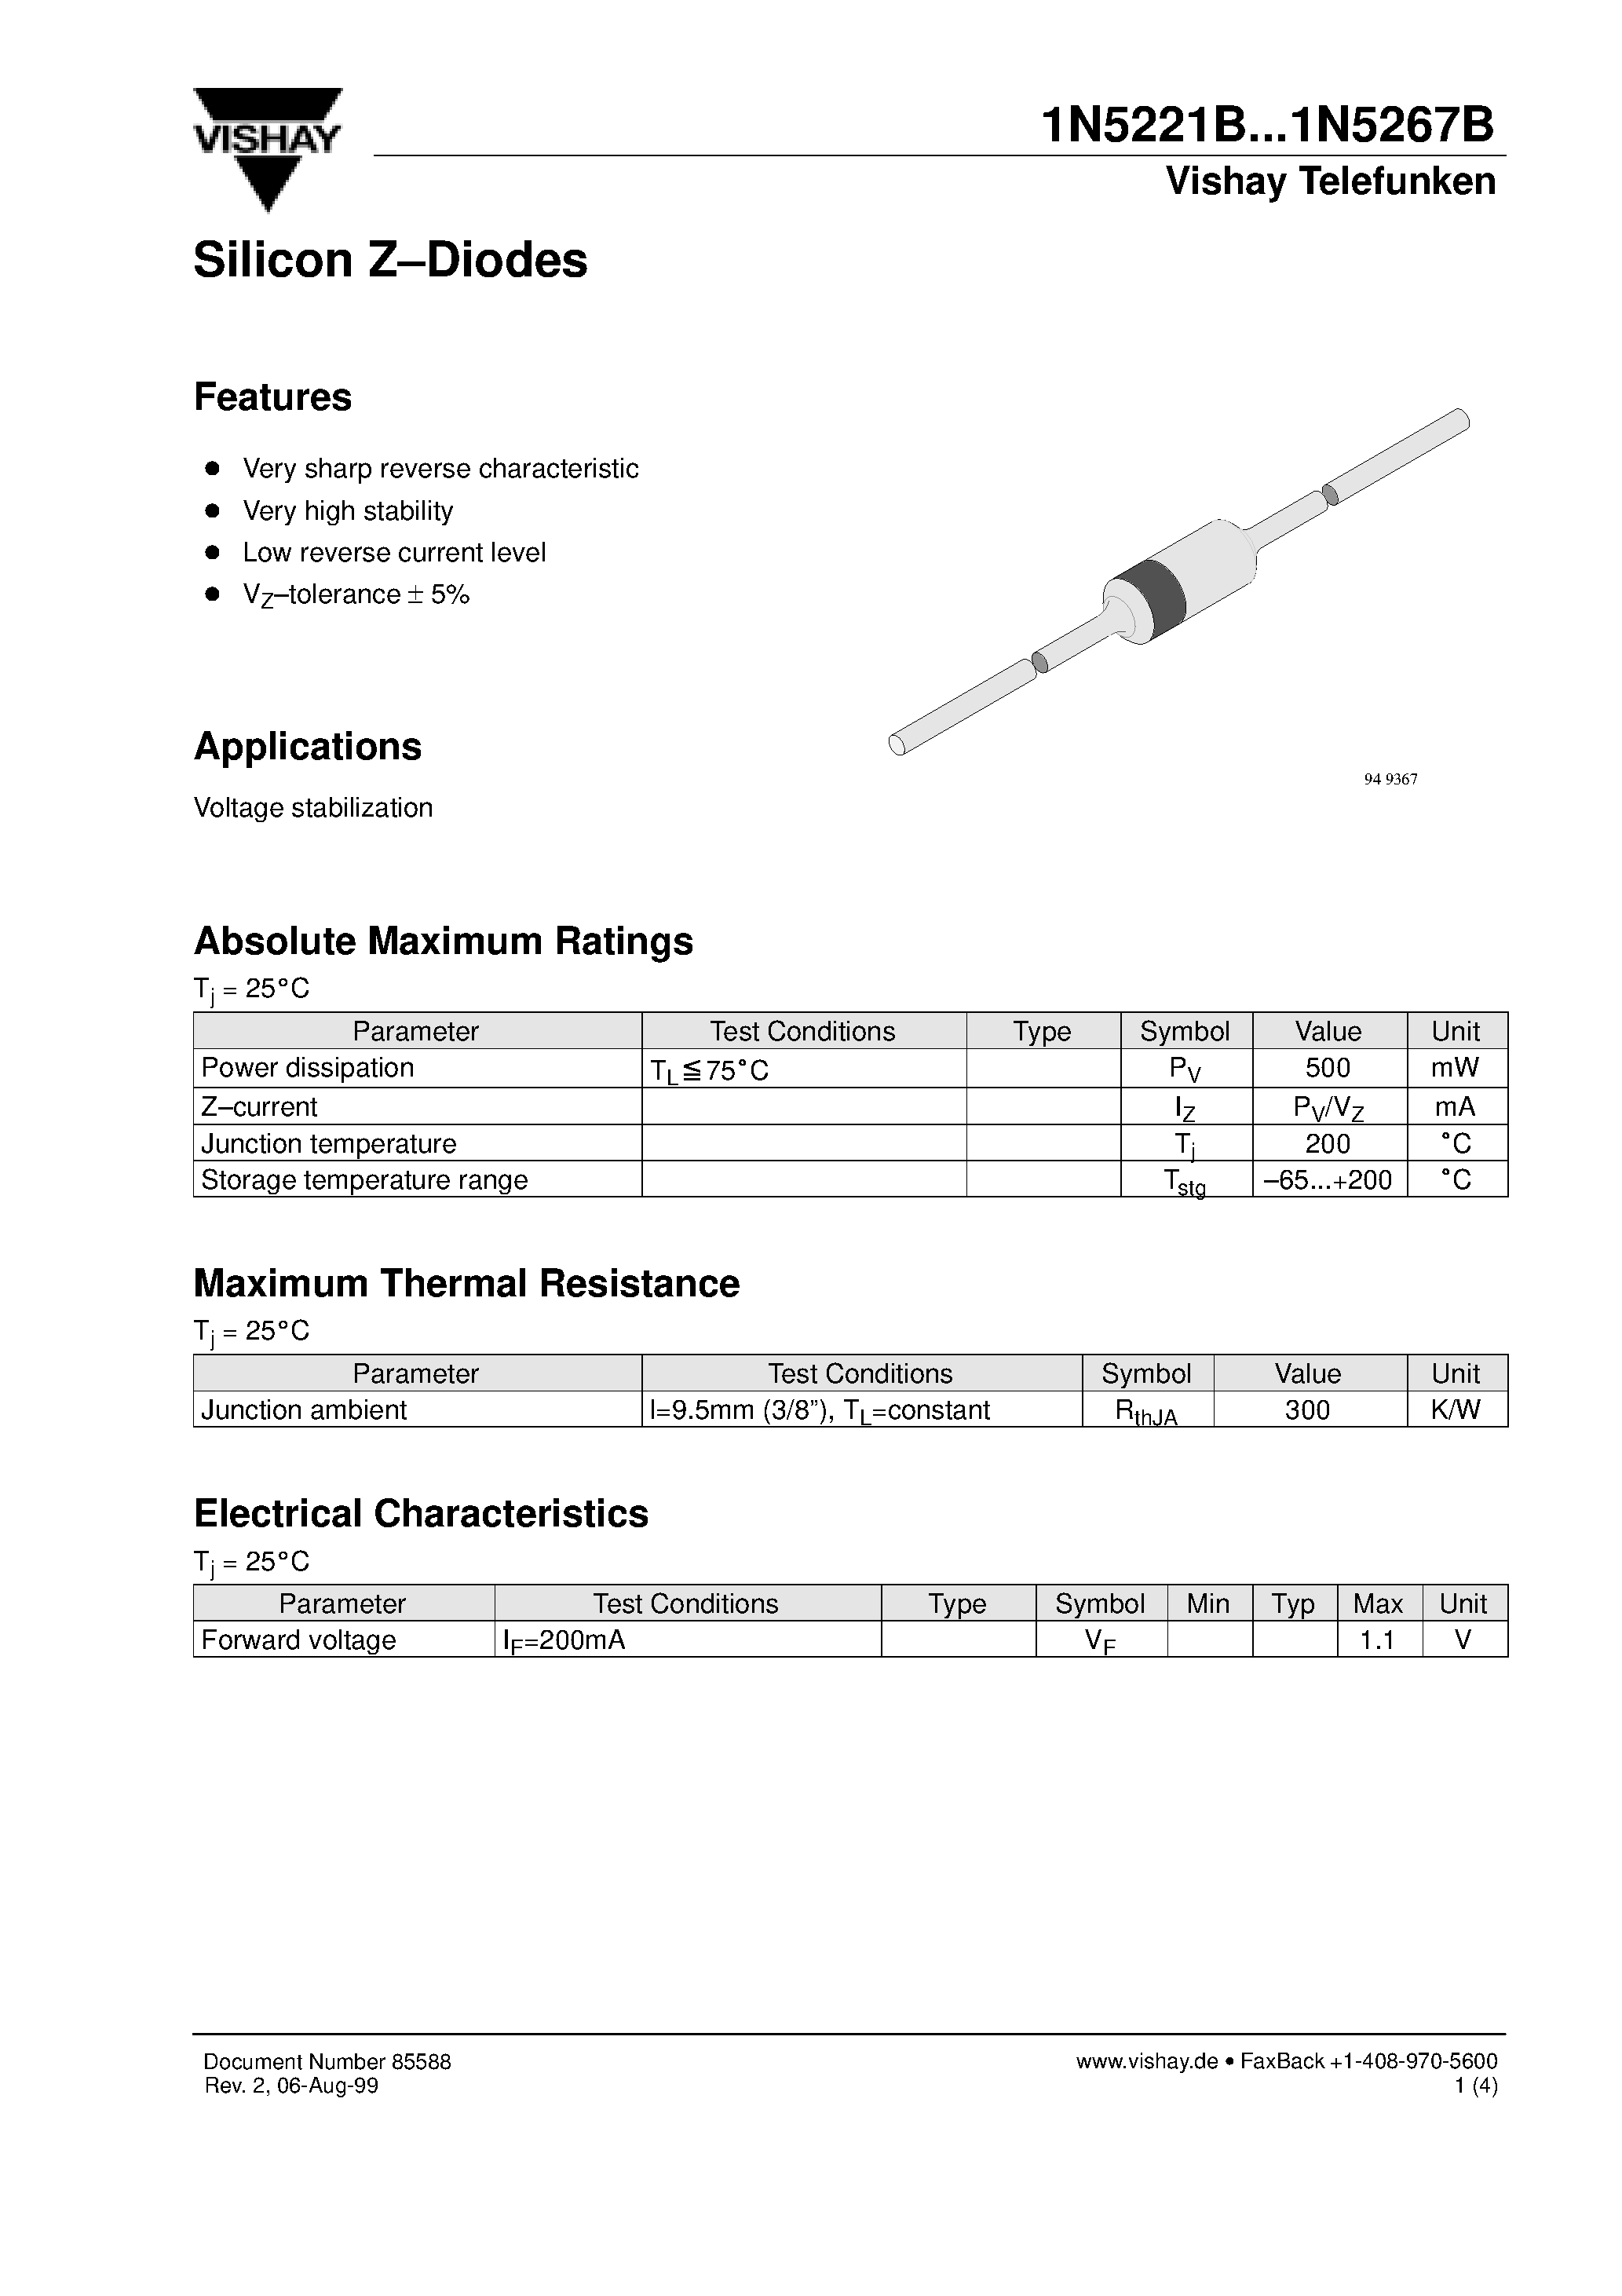 Datasheet 1N5233B - Silicon Z-Diodes page 1